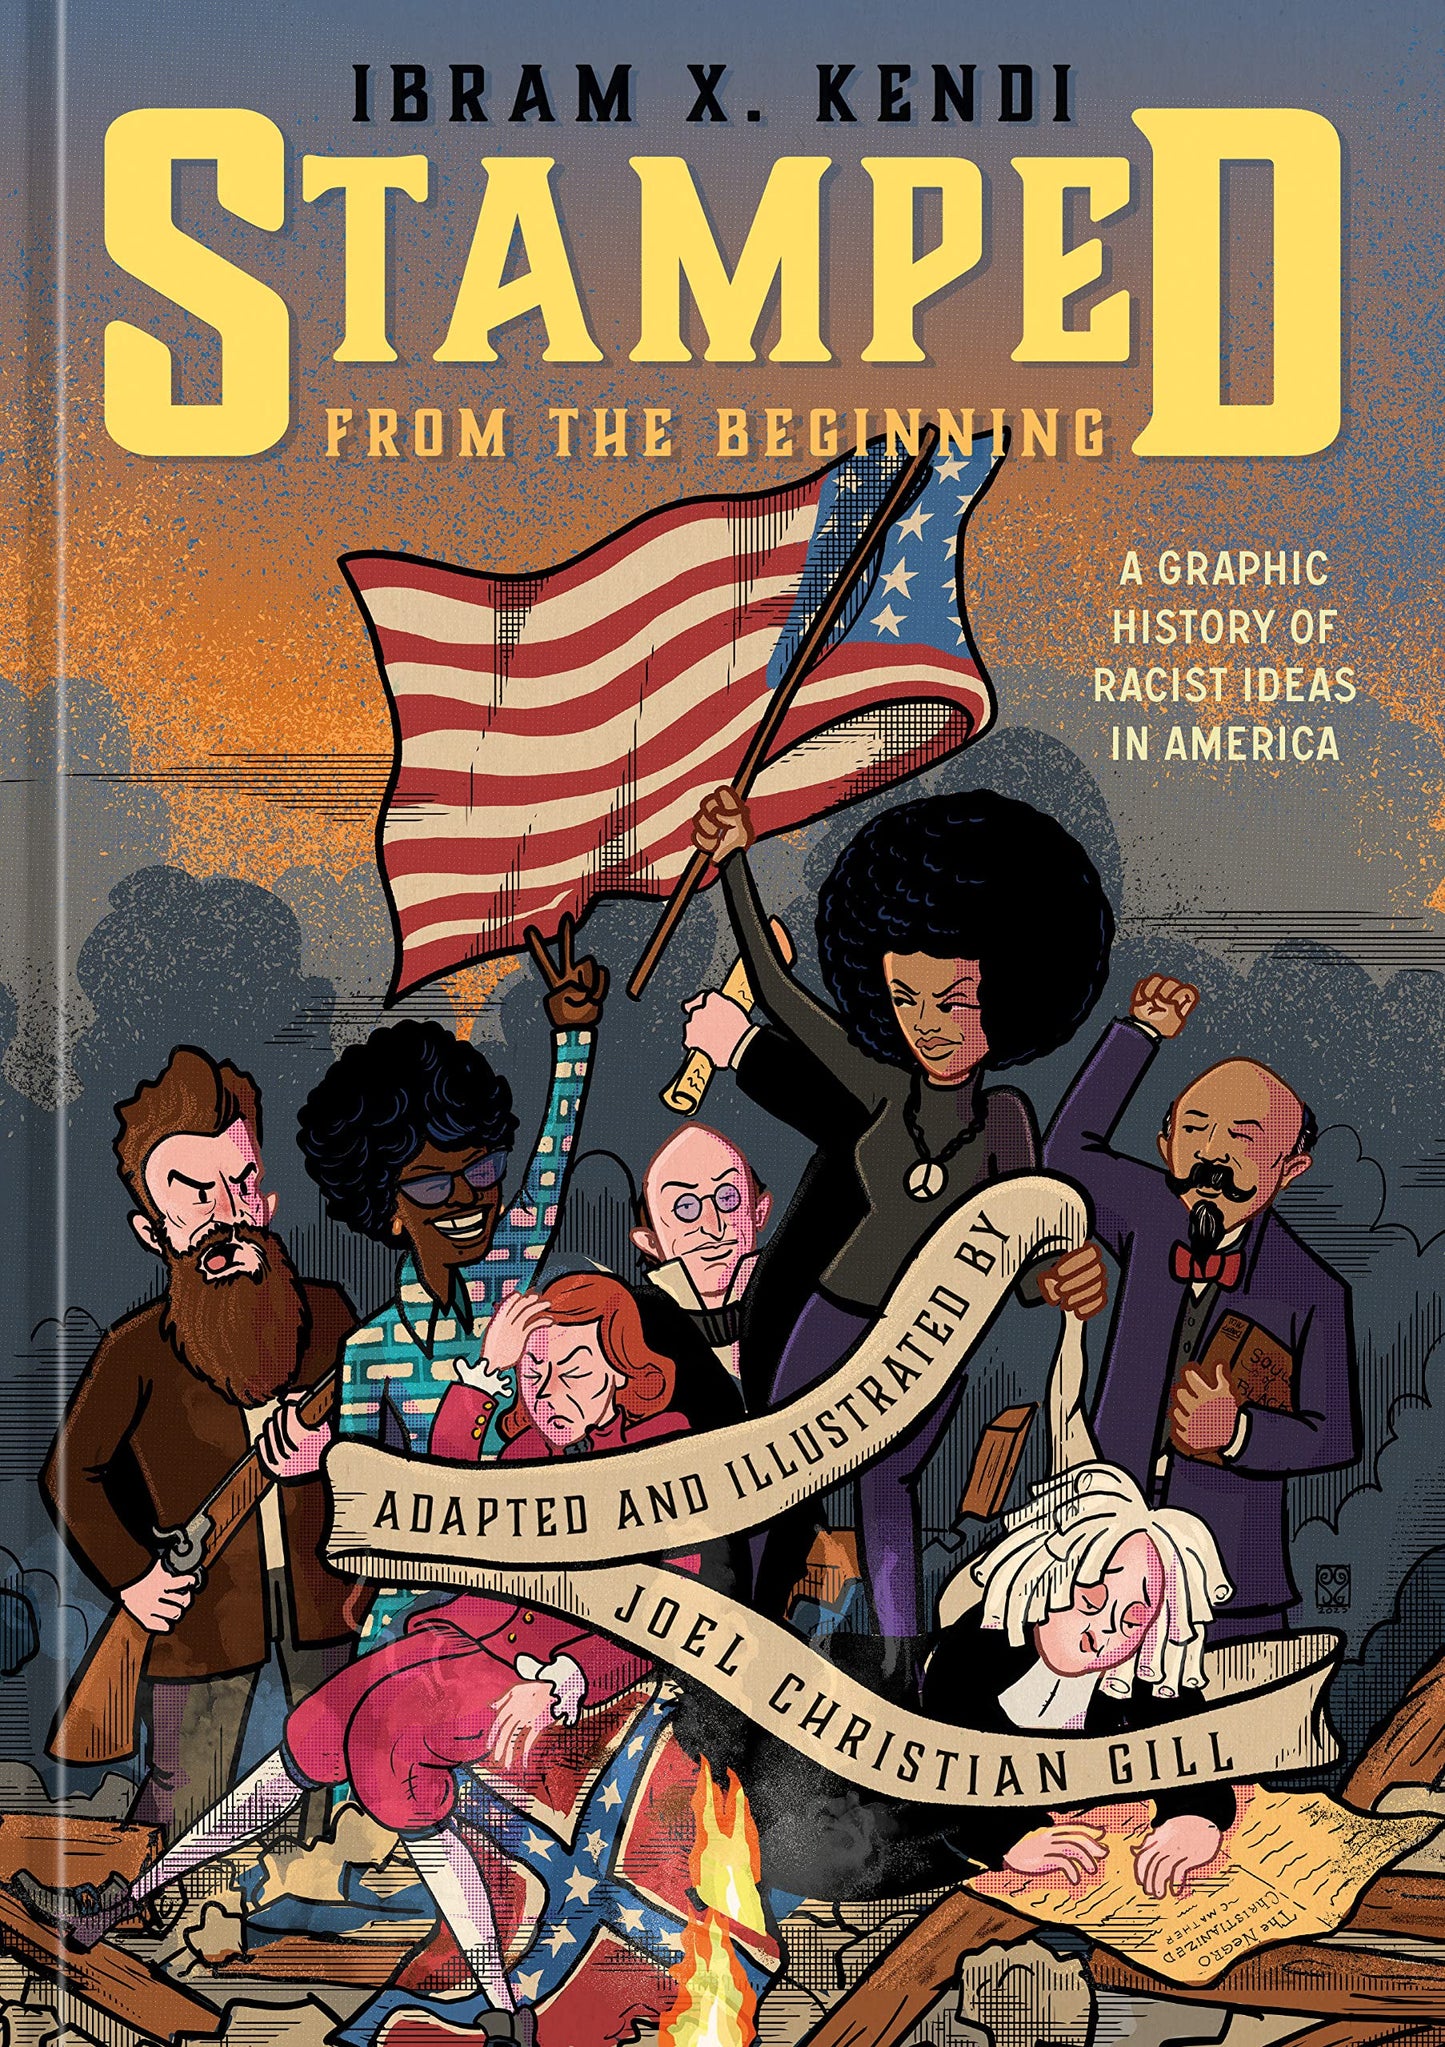 Stamped from the Beginning // A Graphic History of Racist Ideas in America